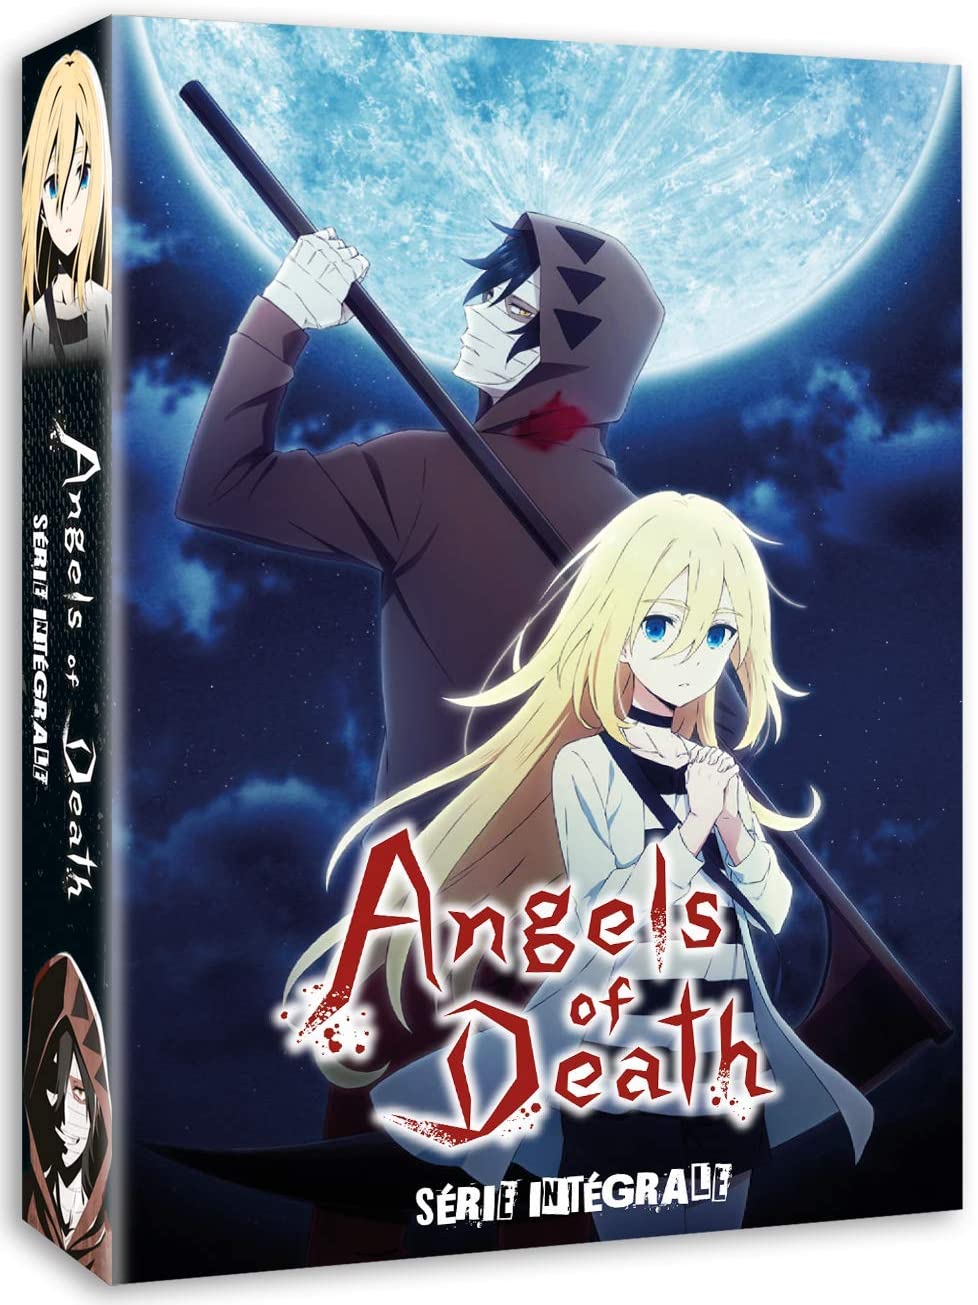 Angels of Death: The Complete Series [Blu-ray]